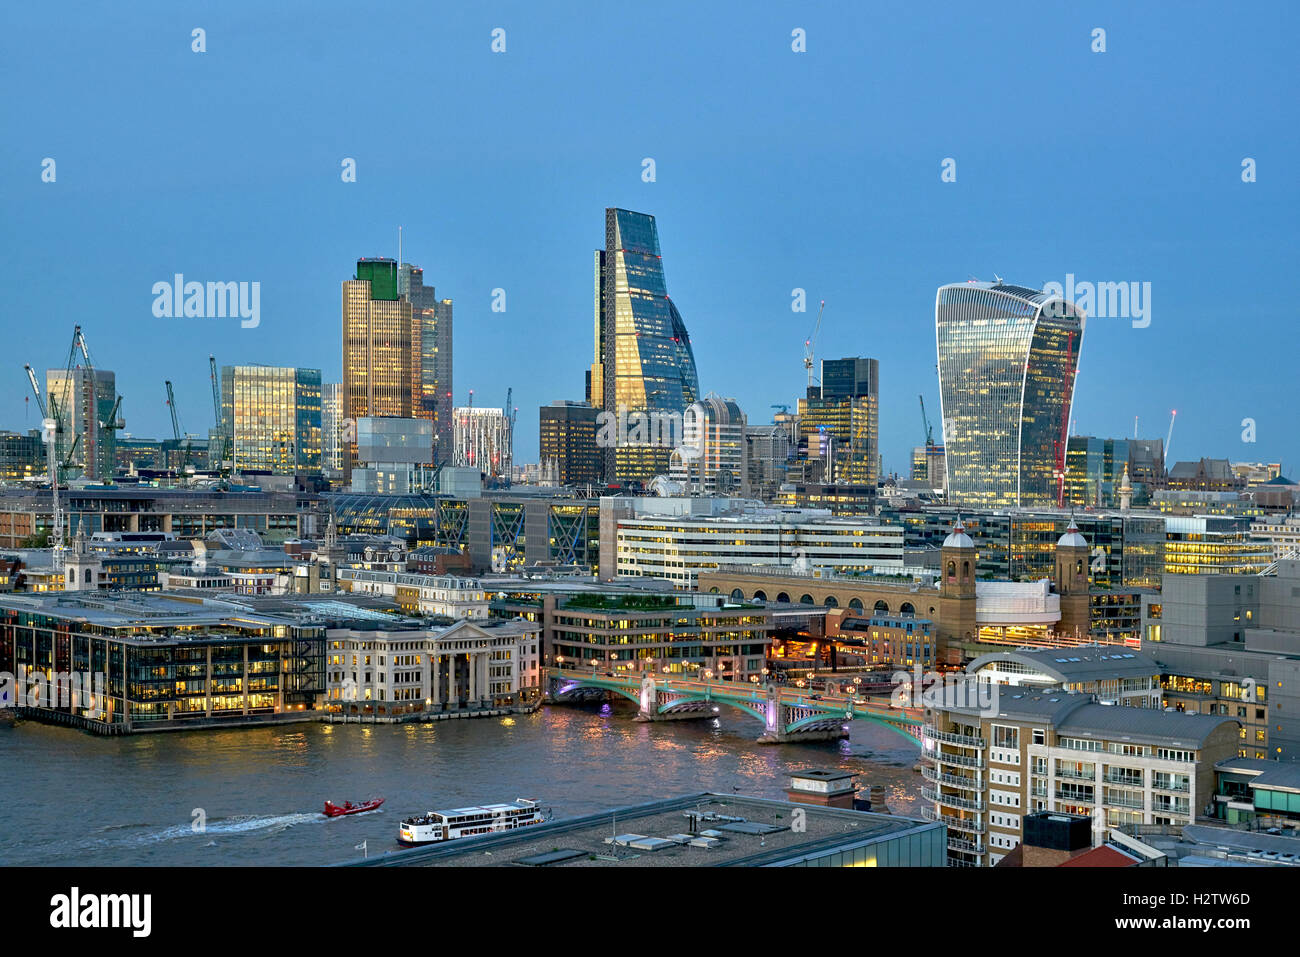 City of London Skyline.   Financial district.  London at night.  Tall buildings  Skyscrapers. Stock Photo